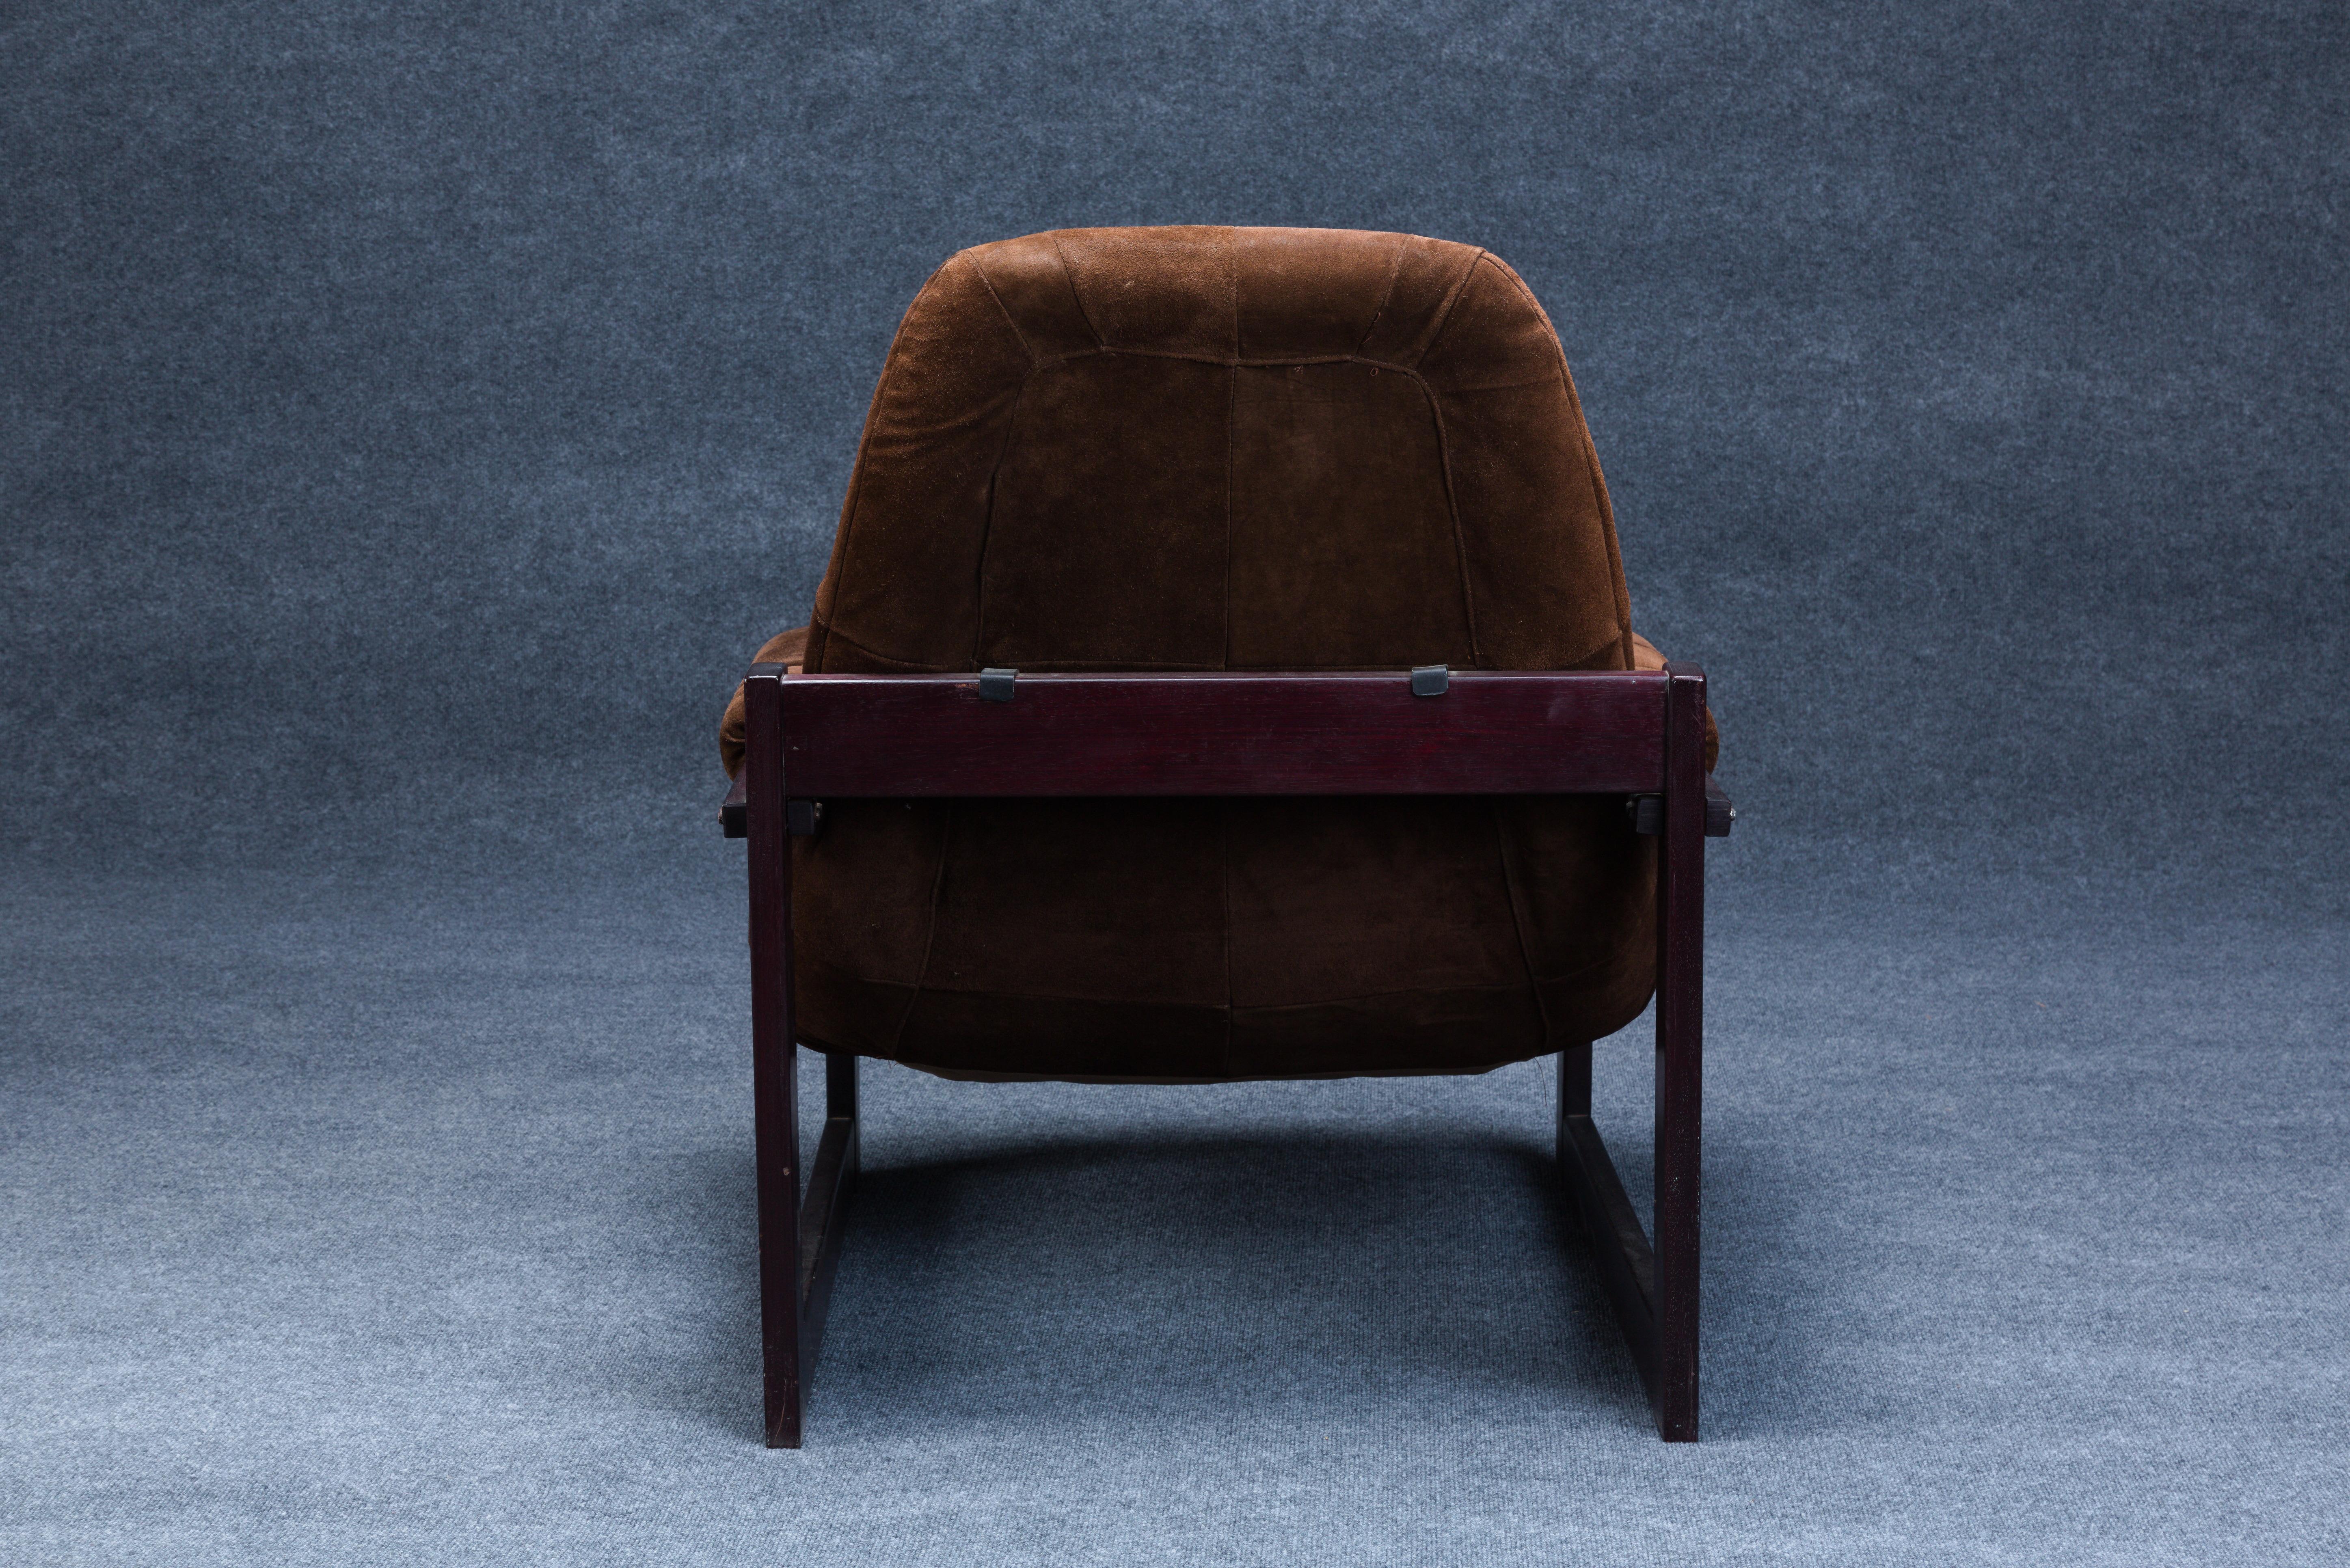 Percival Lafer (Brazilian, b. 1936) Lounge Chair and Ottoman, Brazil, c. 1965, rosewood frames with leather upholstery, chair, foil Design Lafer label and remains to a paper label, ht. 36, seat ht. 15 1/2, wd. 32, dp. 32, ottoman conforming with